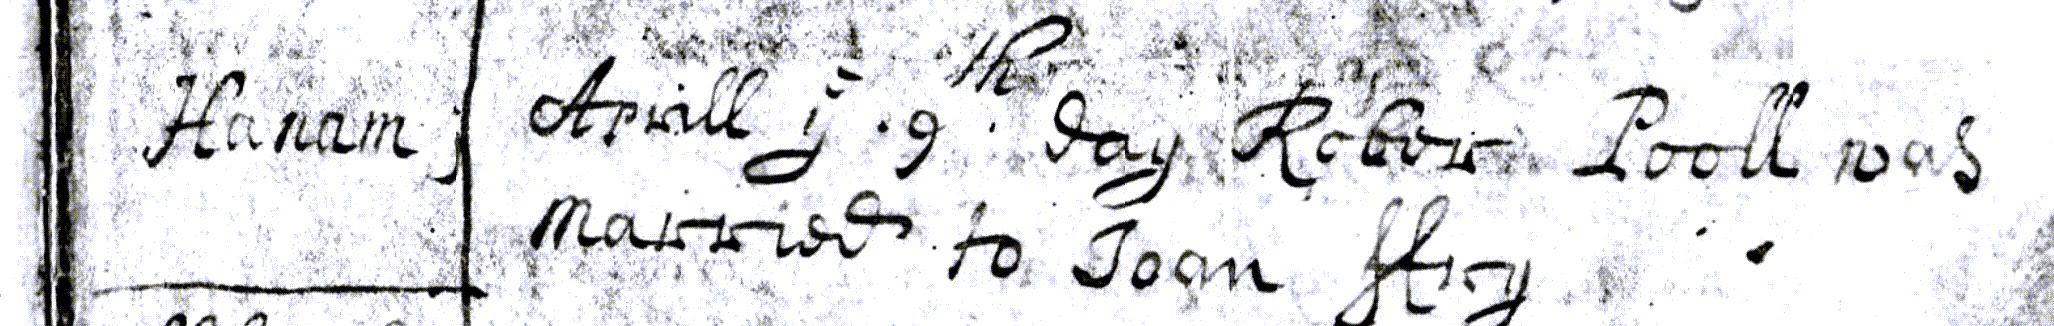 Figure 1: Marriage Register entry for Robert Pooll and Joan Fry